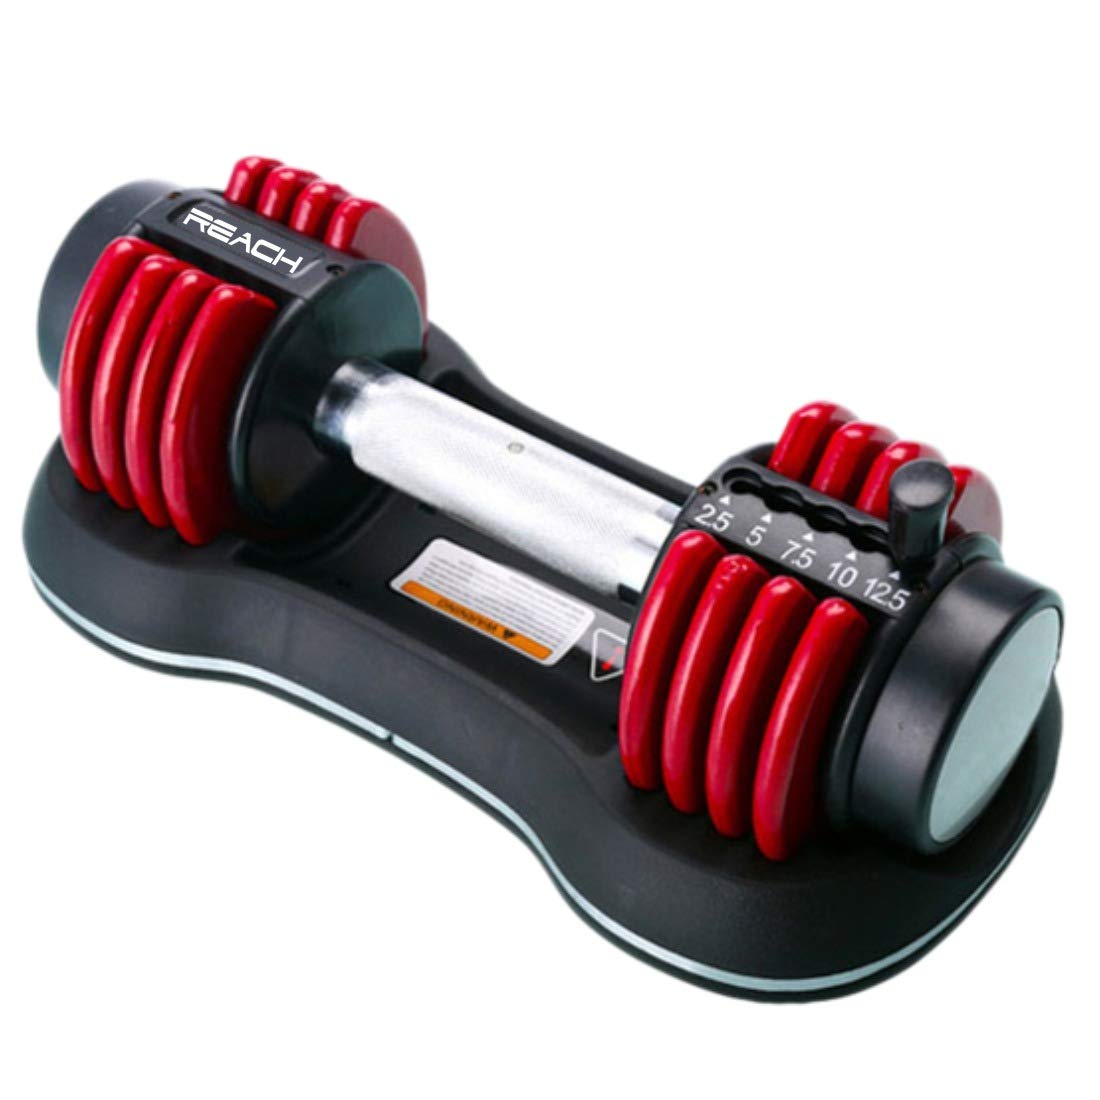 Reach Carbon Adjustable Dumbbells (2.2 kg to 11 kg) Pefect Home Gym Equipment for Fitness and Full Body Workout Easy Weight Adjustment with Pin Lock Technology Space Saver Dumbbell Suitable for Men and Women